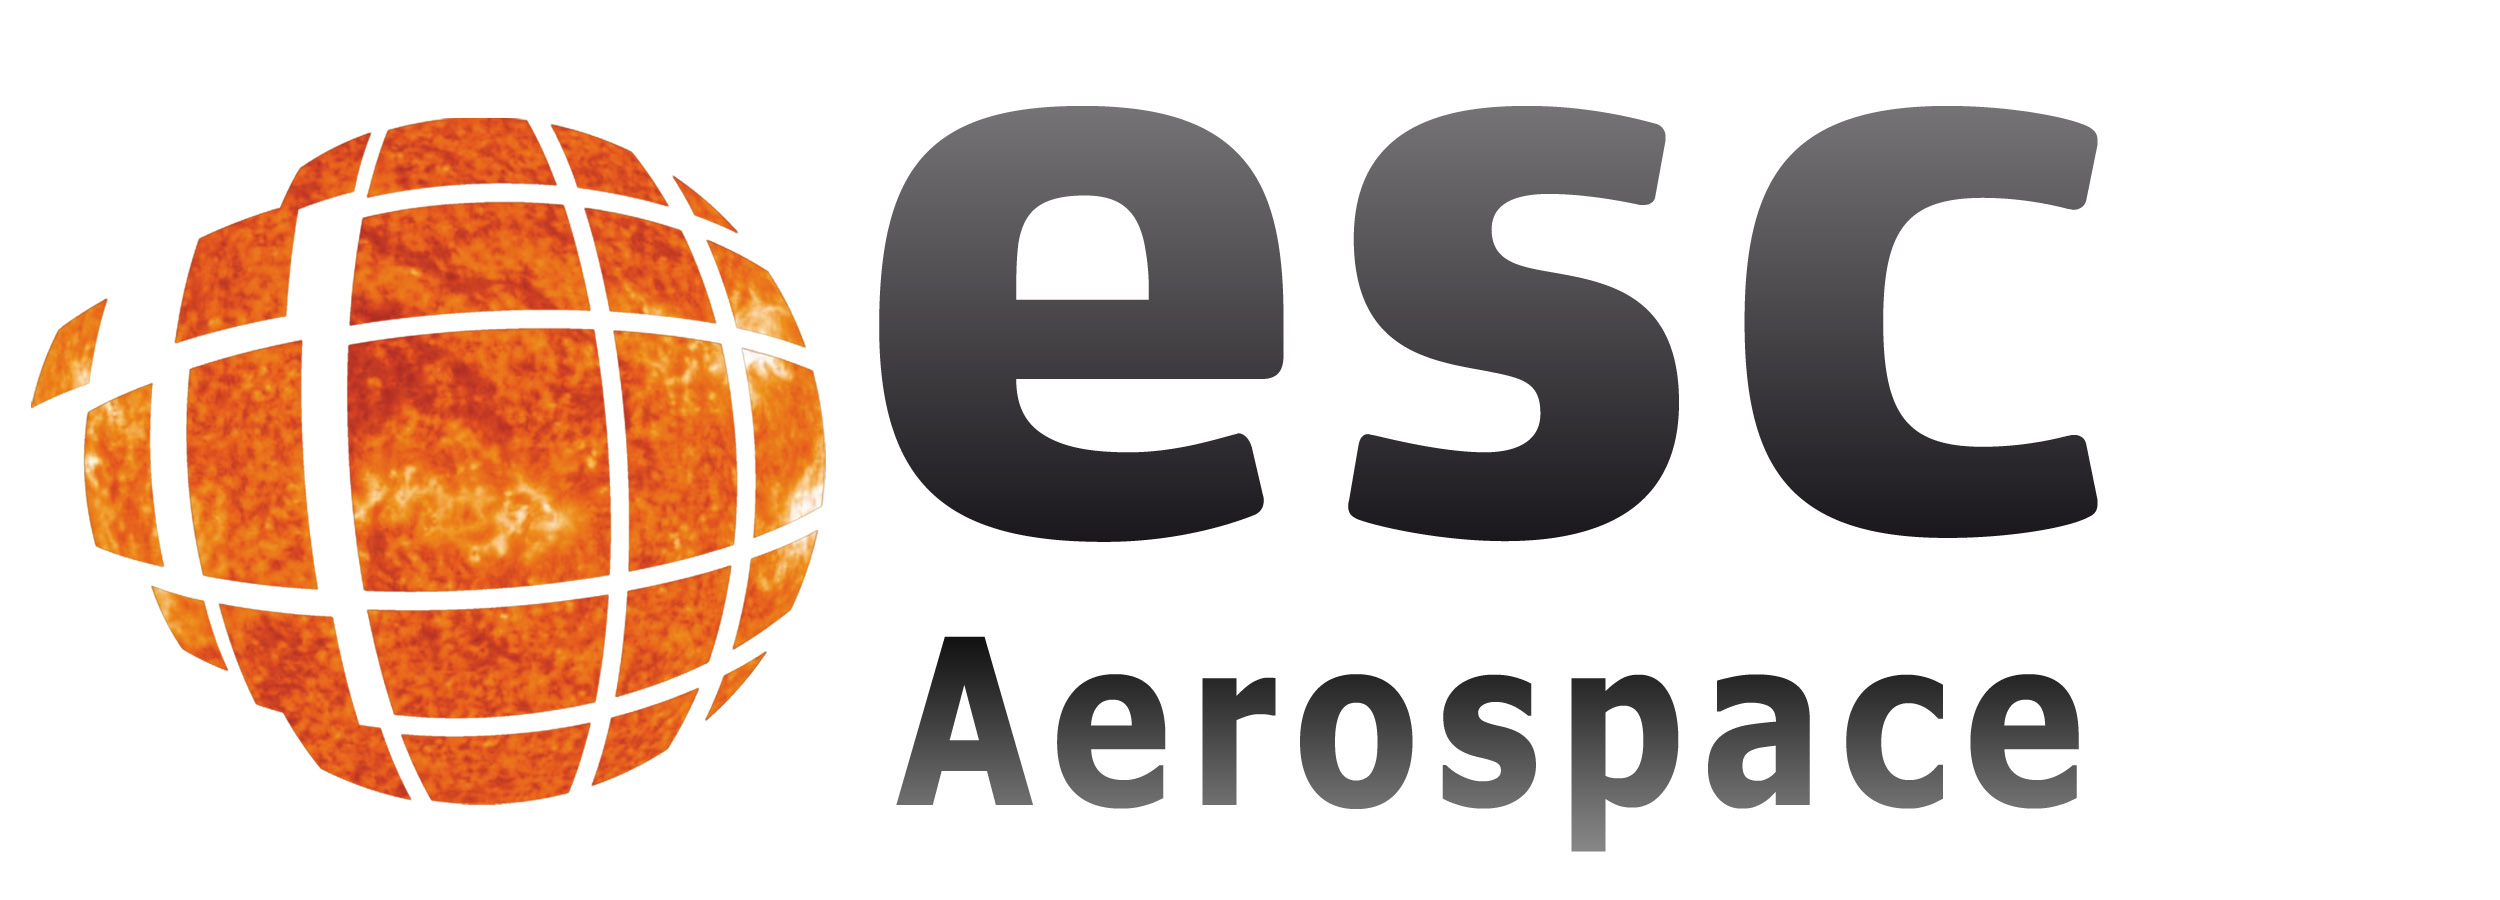 esc Aerospace US, Inc., Innovators in Non-GPS Aerospace Solutions, Launches Investment Crowdfunding Campaign